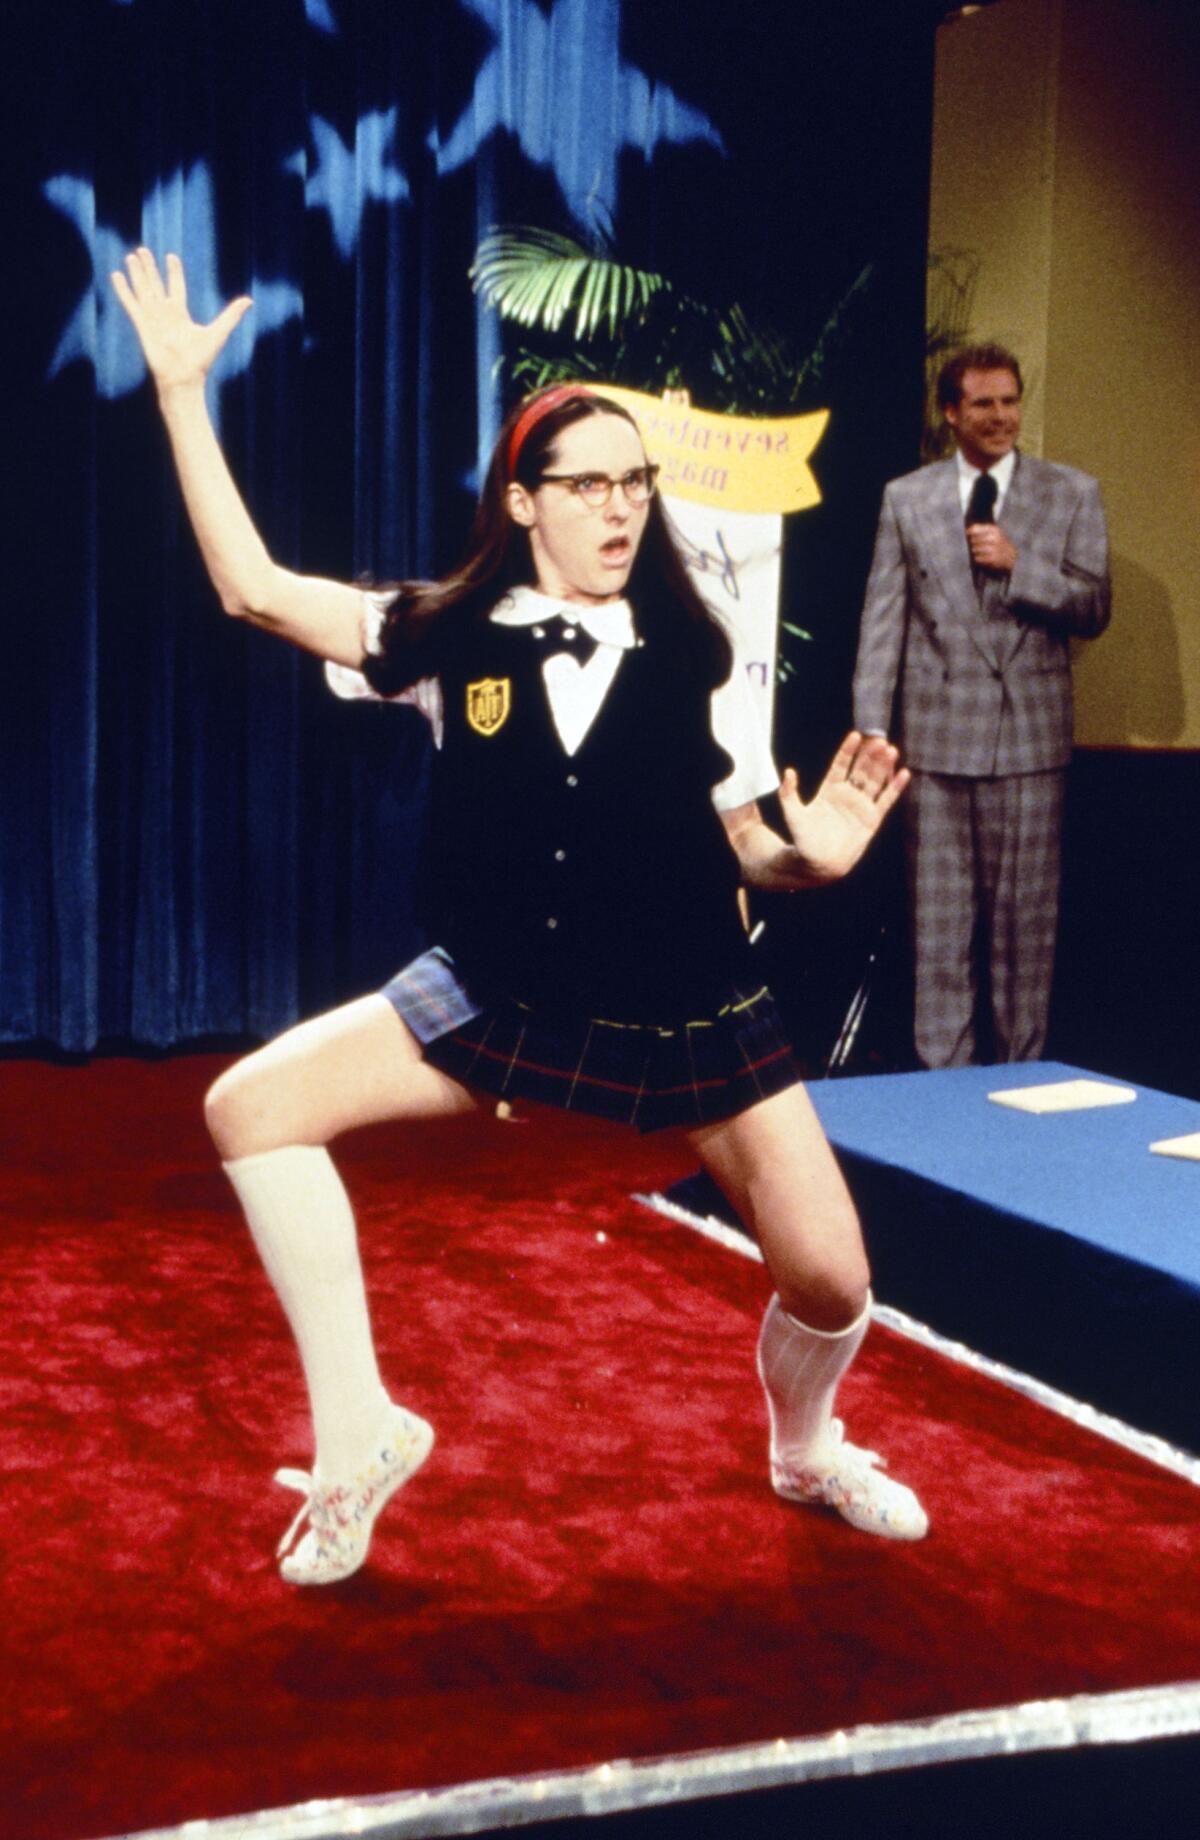 A Catholic schoolgirl, played by Molly Shannon, poses on a stage